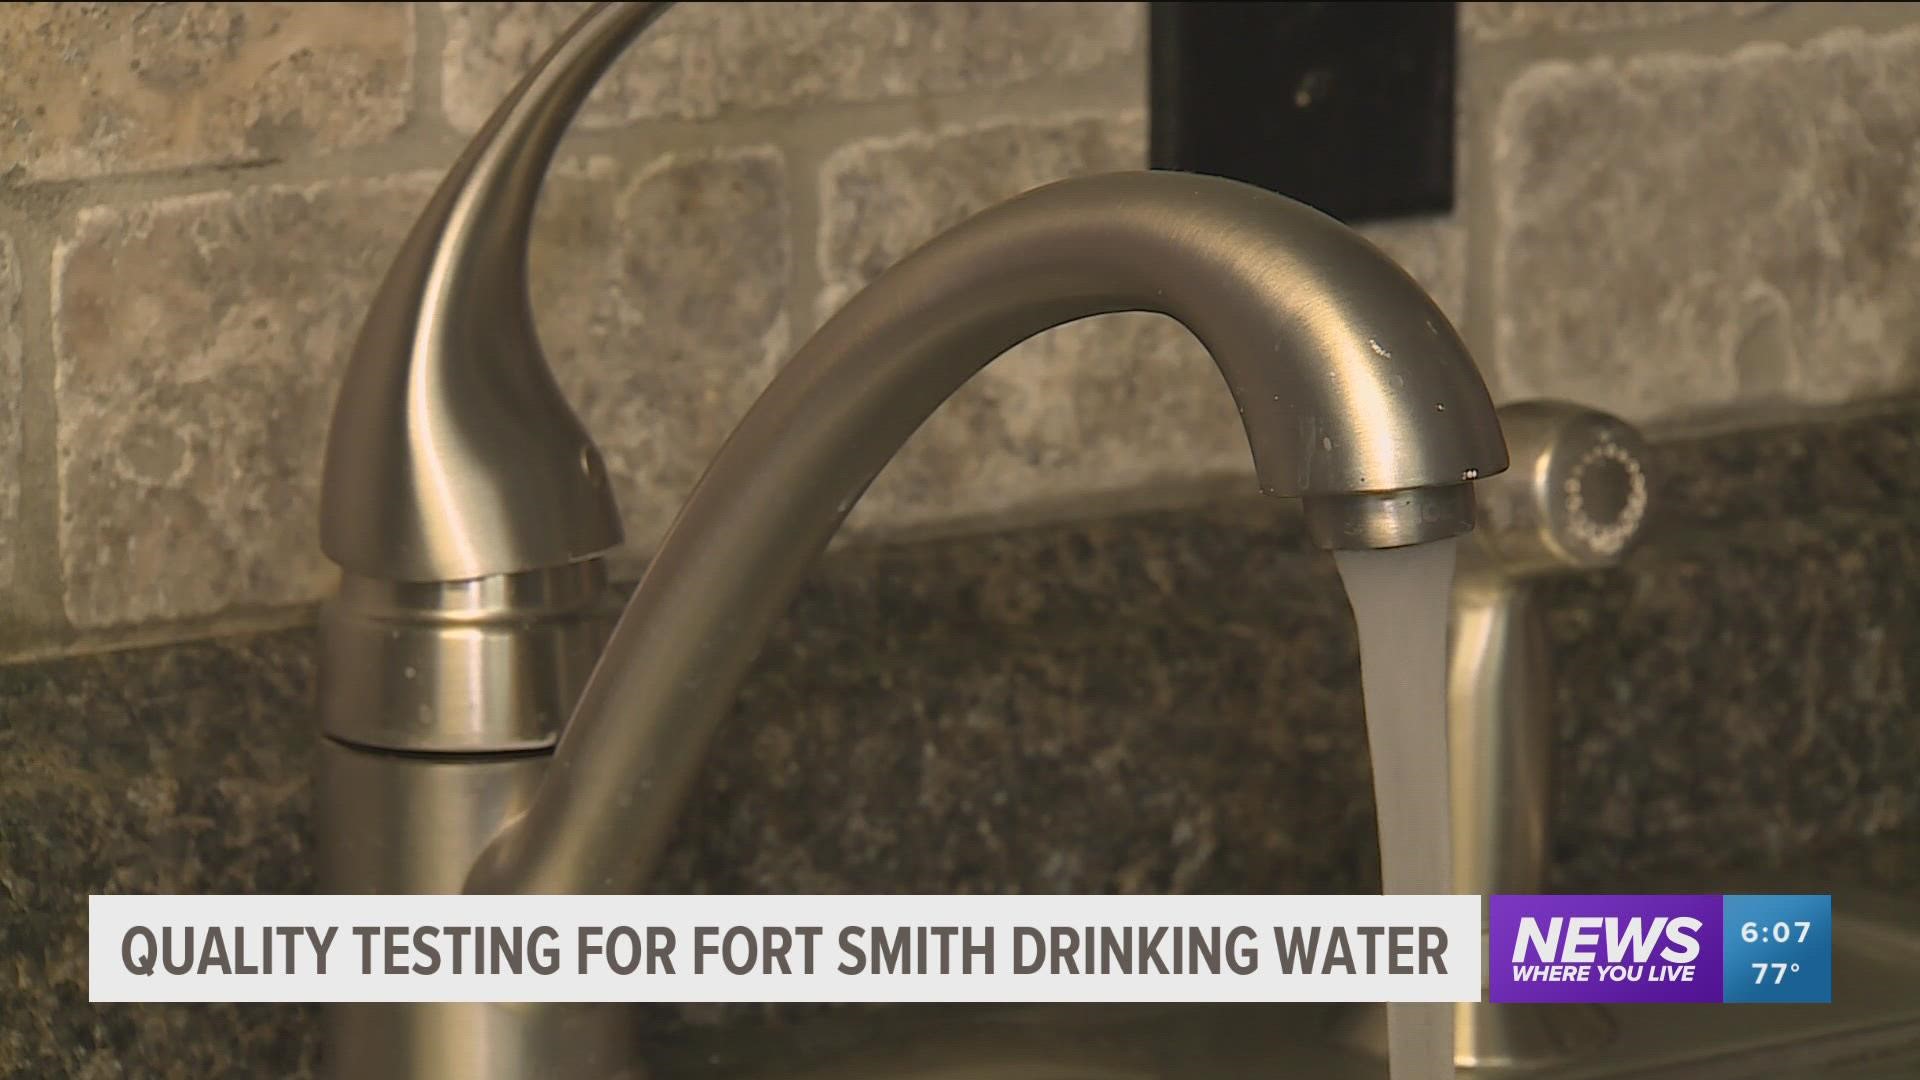 To make sure Fort Smith is in federal compliance with the Safe Drinking Water Act, the ADH will be testing water from some residents for lead and copper levels.